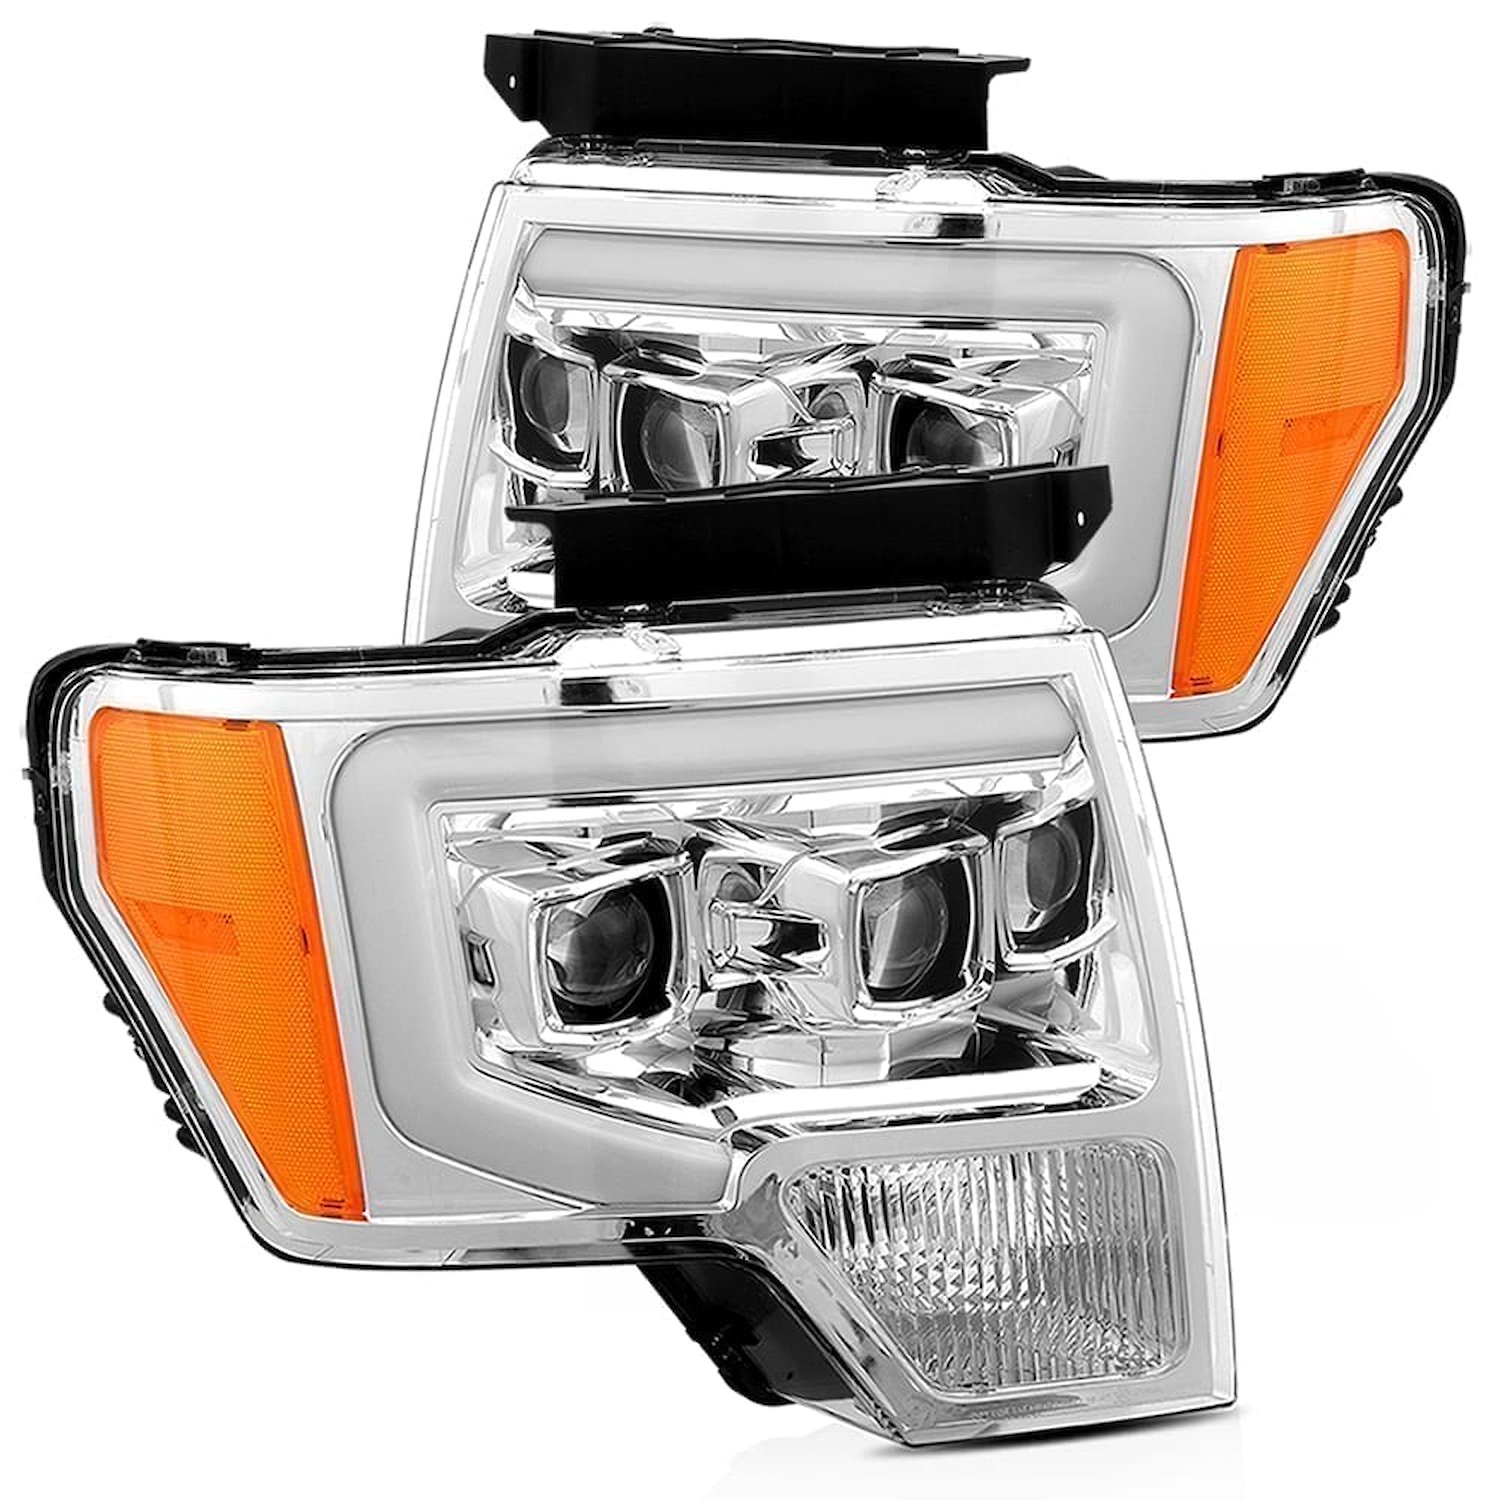 880178 Luxx-Series LED Projector Headlights for 2009-2014 Ford F-150 - Chrome